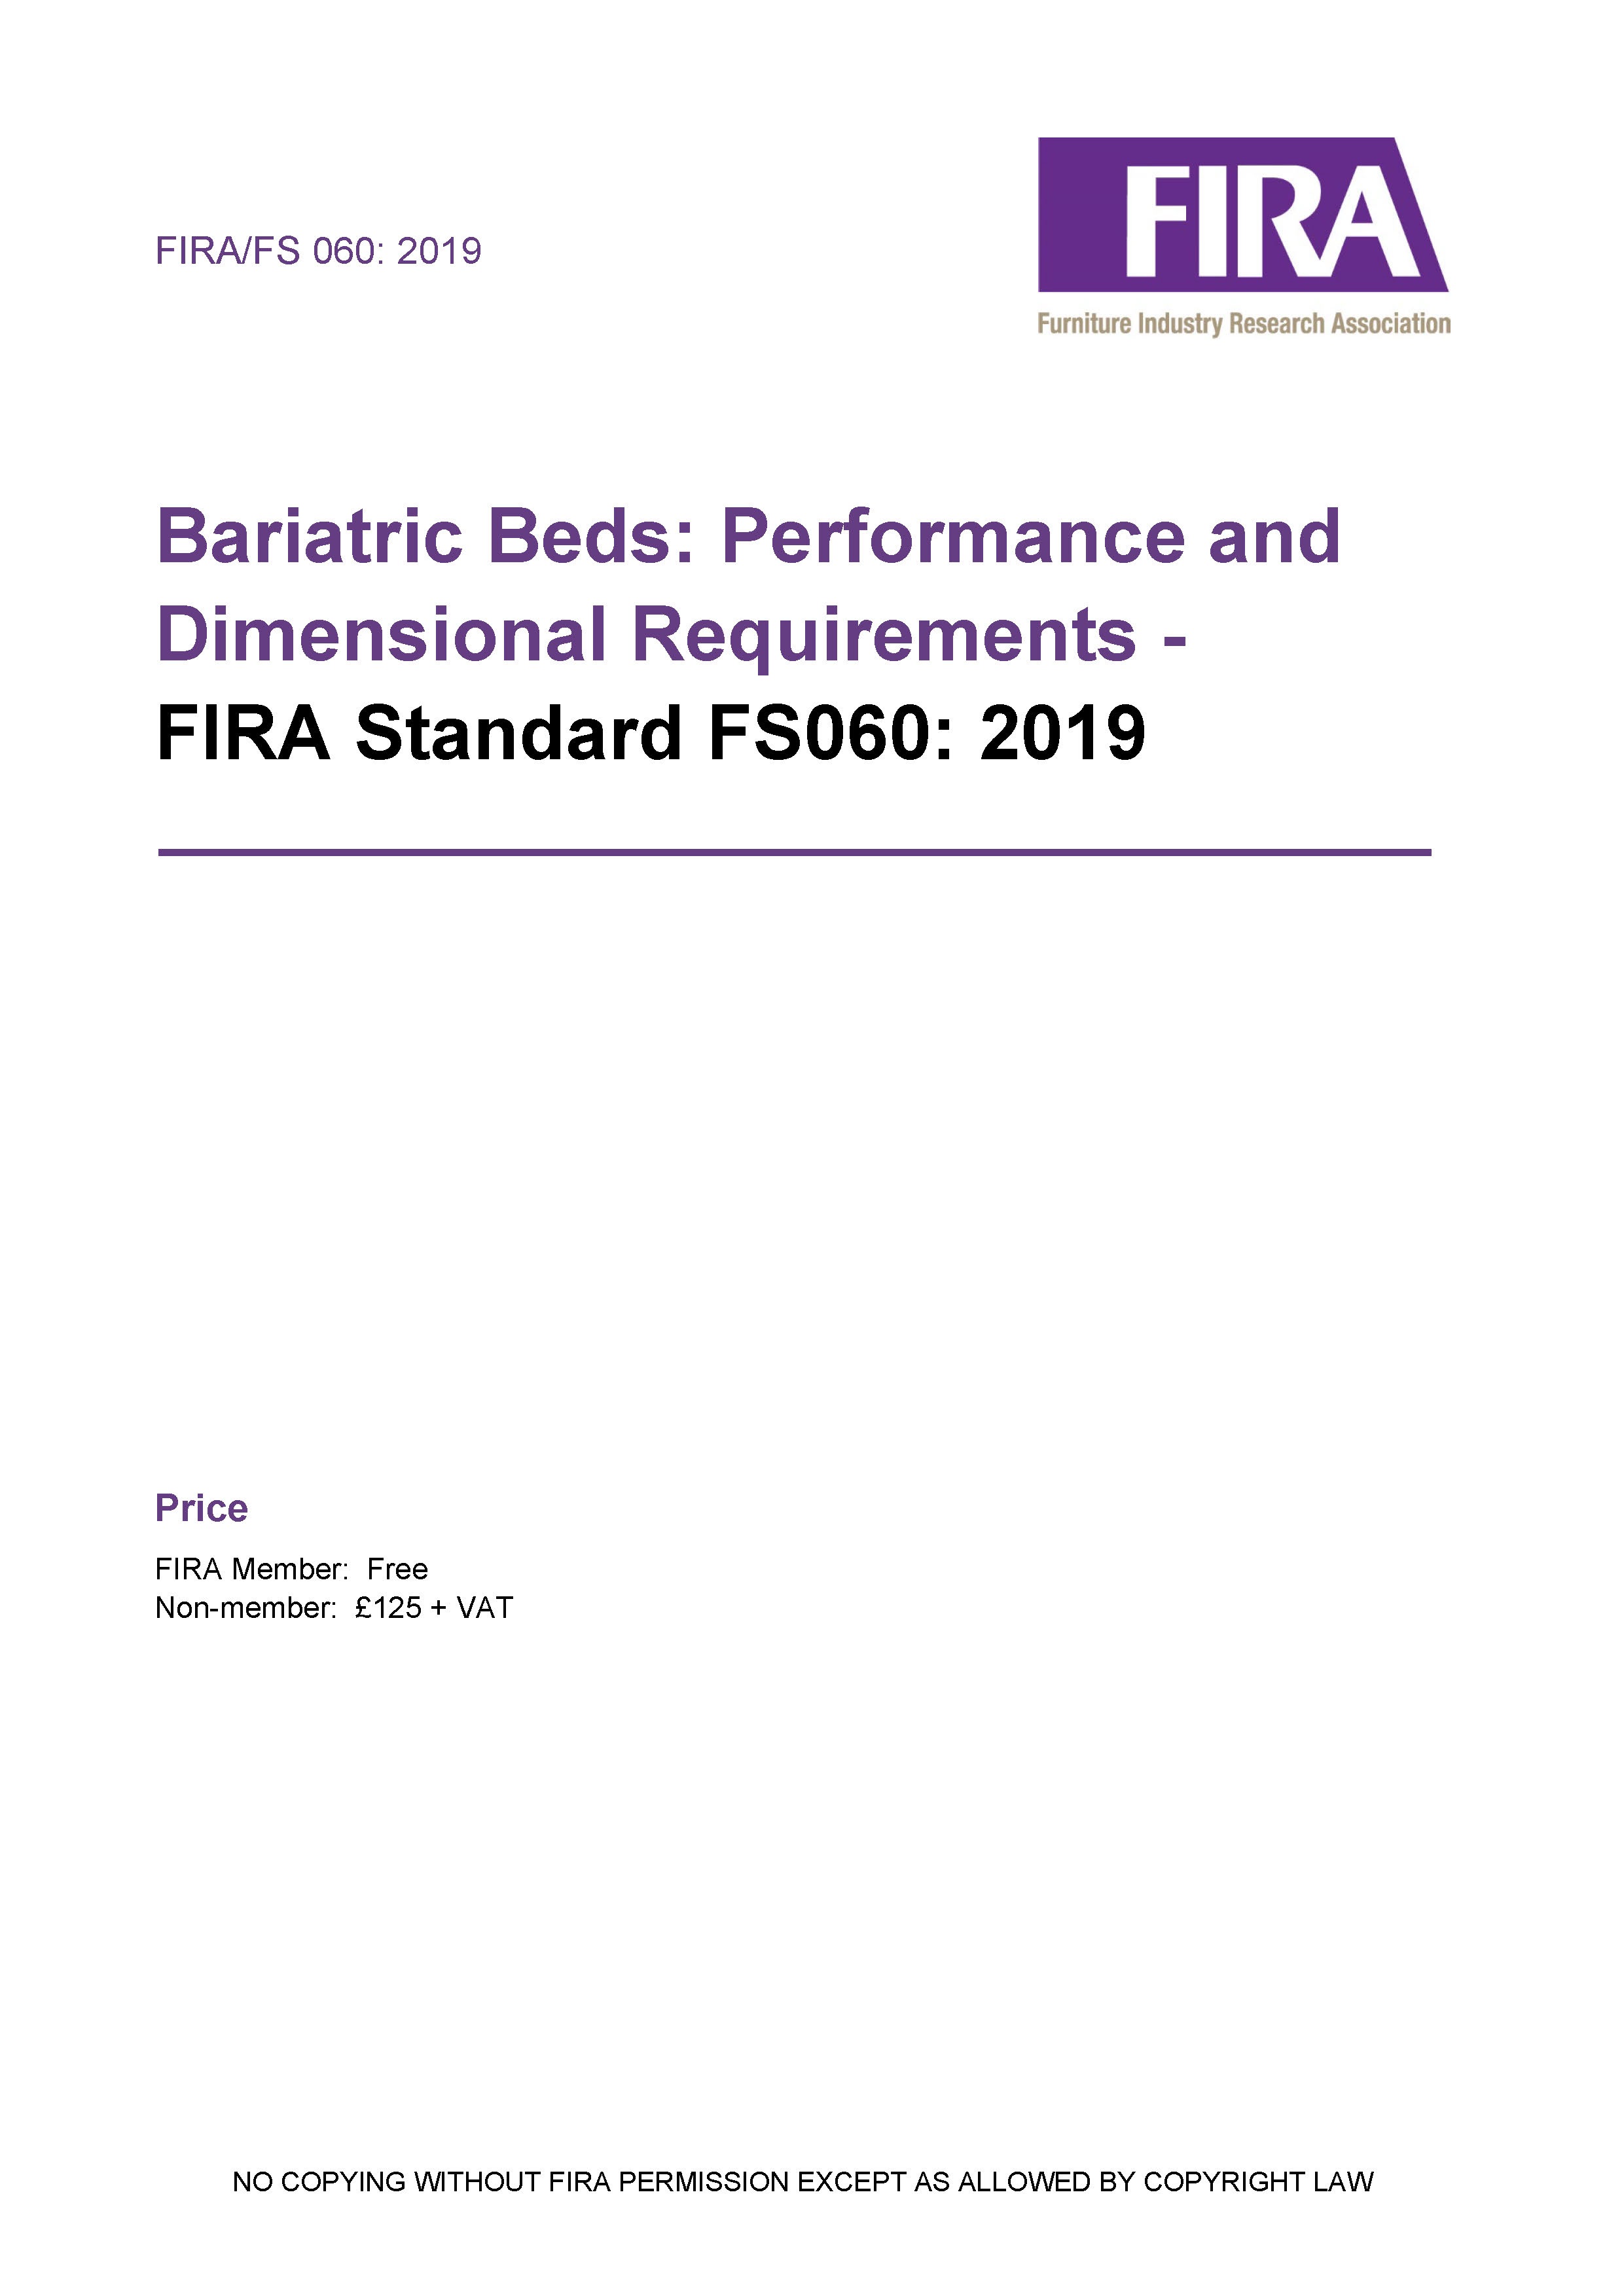 Bariatric Beds: Performance and Dimensional Requirements - FIRA Standard FS060:2019